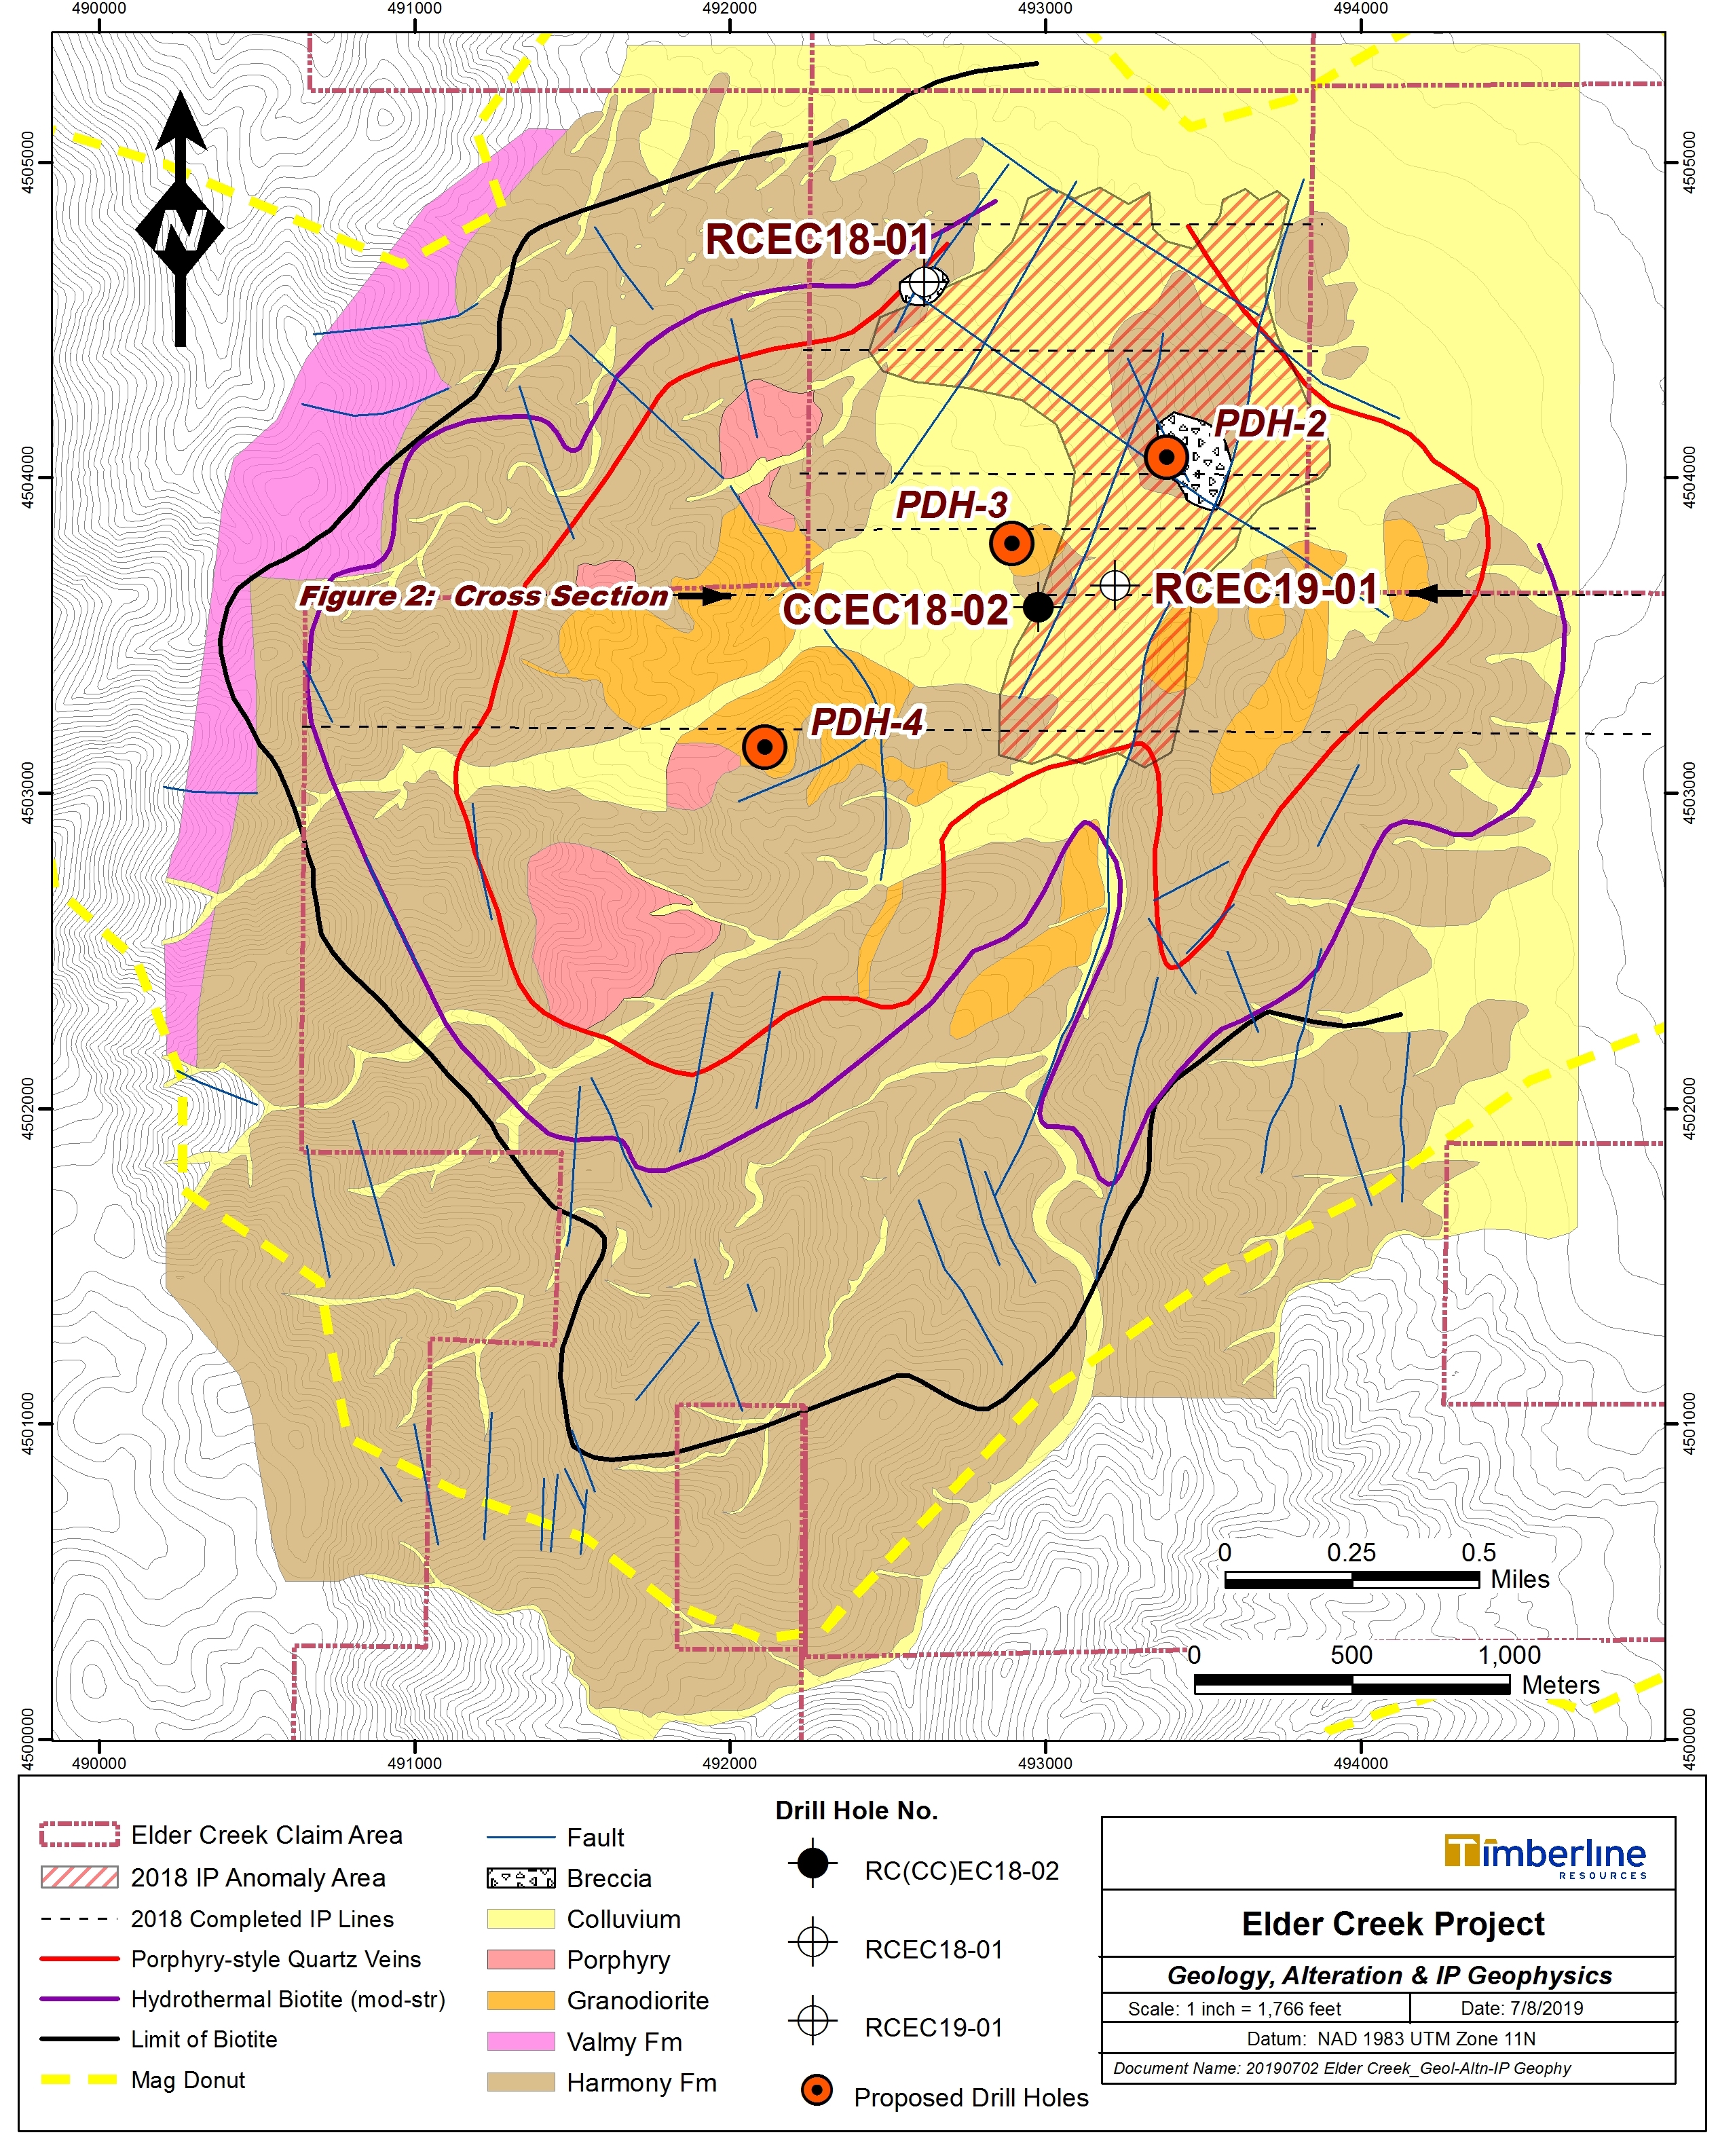 Timberline Resources Corporation, Tuesday, July 9, 2019, Press release picture